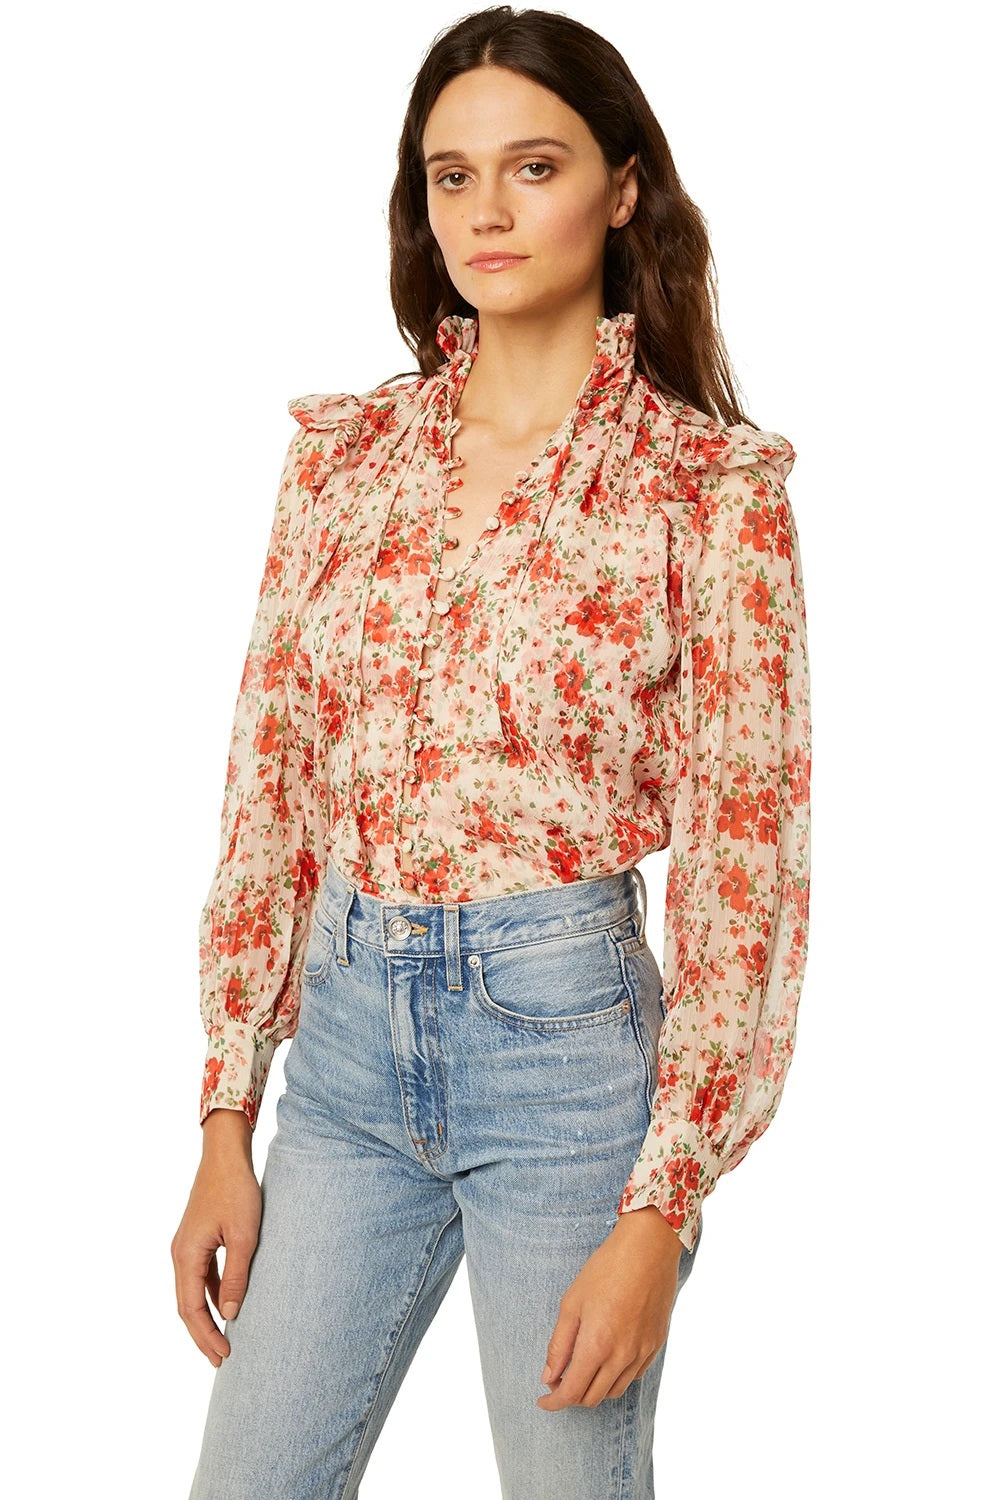 Misa - Analeigh Top in Poppy Allover